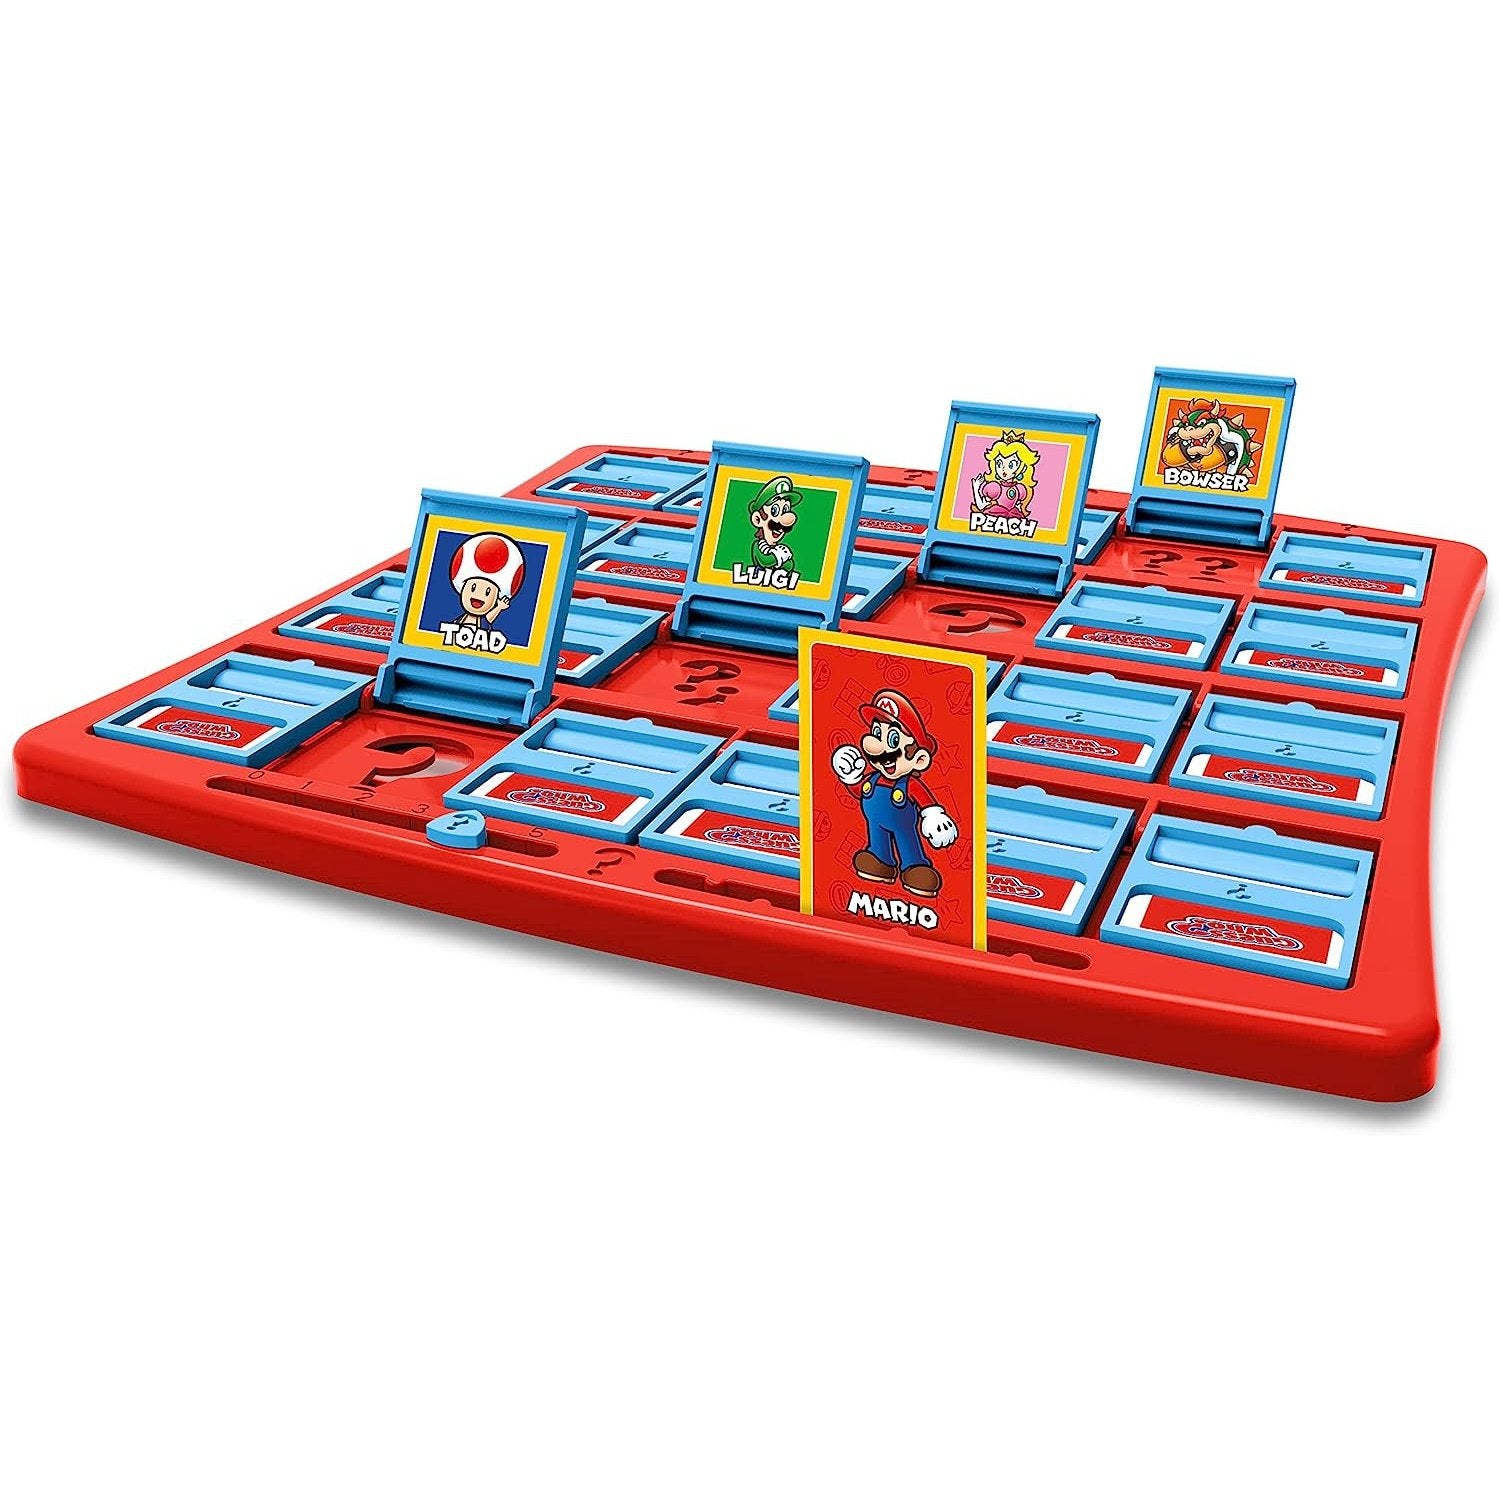 Winning Moves Super Mario Guess Who? Board Game, Play with Classic Nintendo Characters Including Mario, Luigi, Peach, Bowser, and Donkey Kong, Ages 6 and up, WM03076-EN1-6,Blue,Red